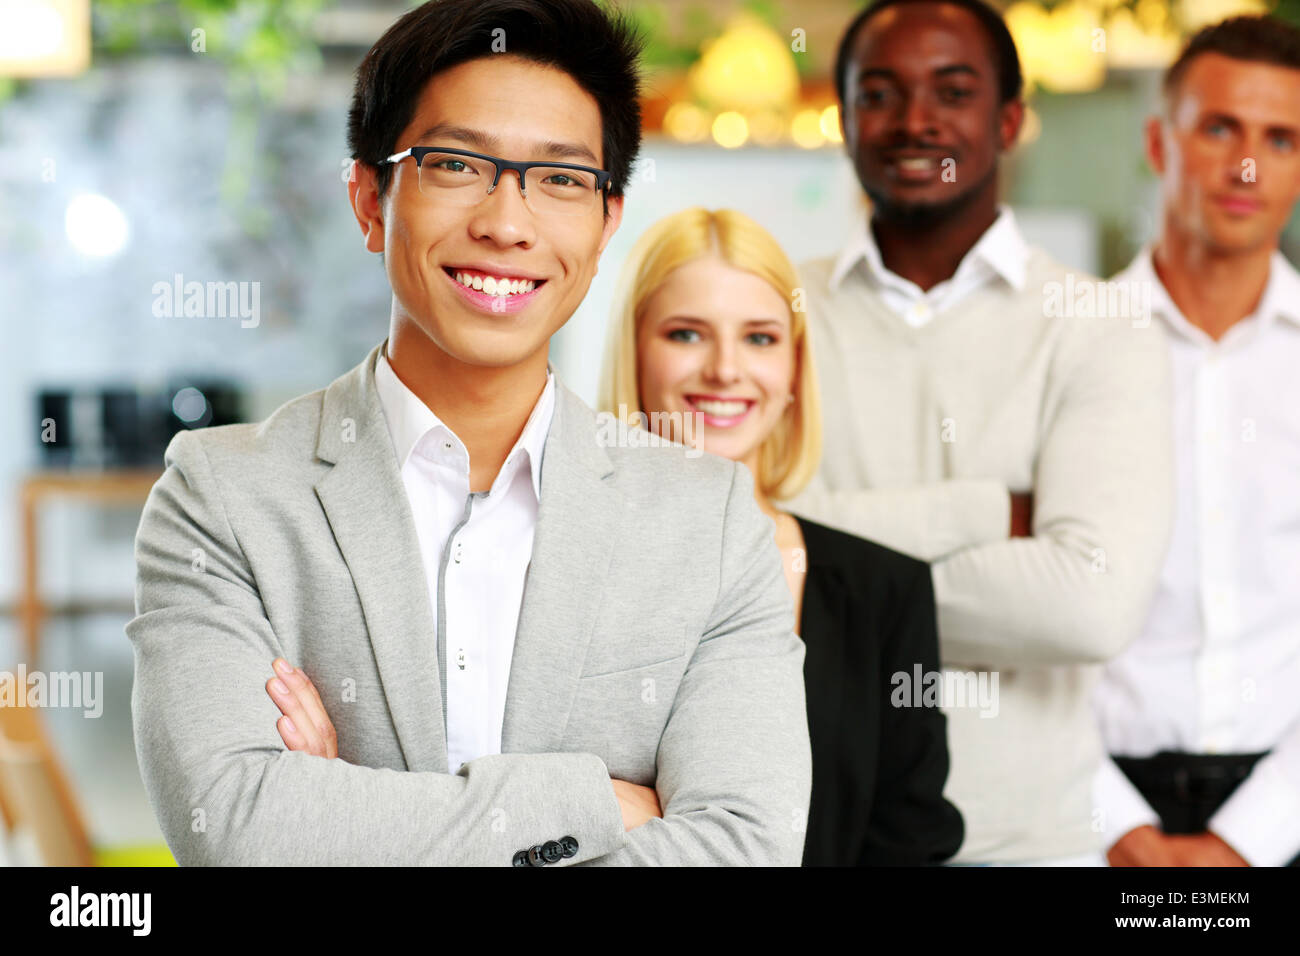 Cheerful group of business people in the office lined up Stock Photo